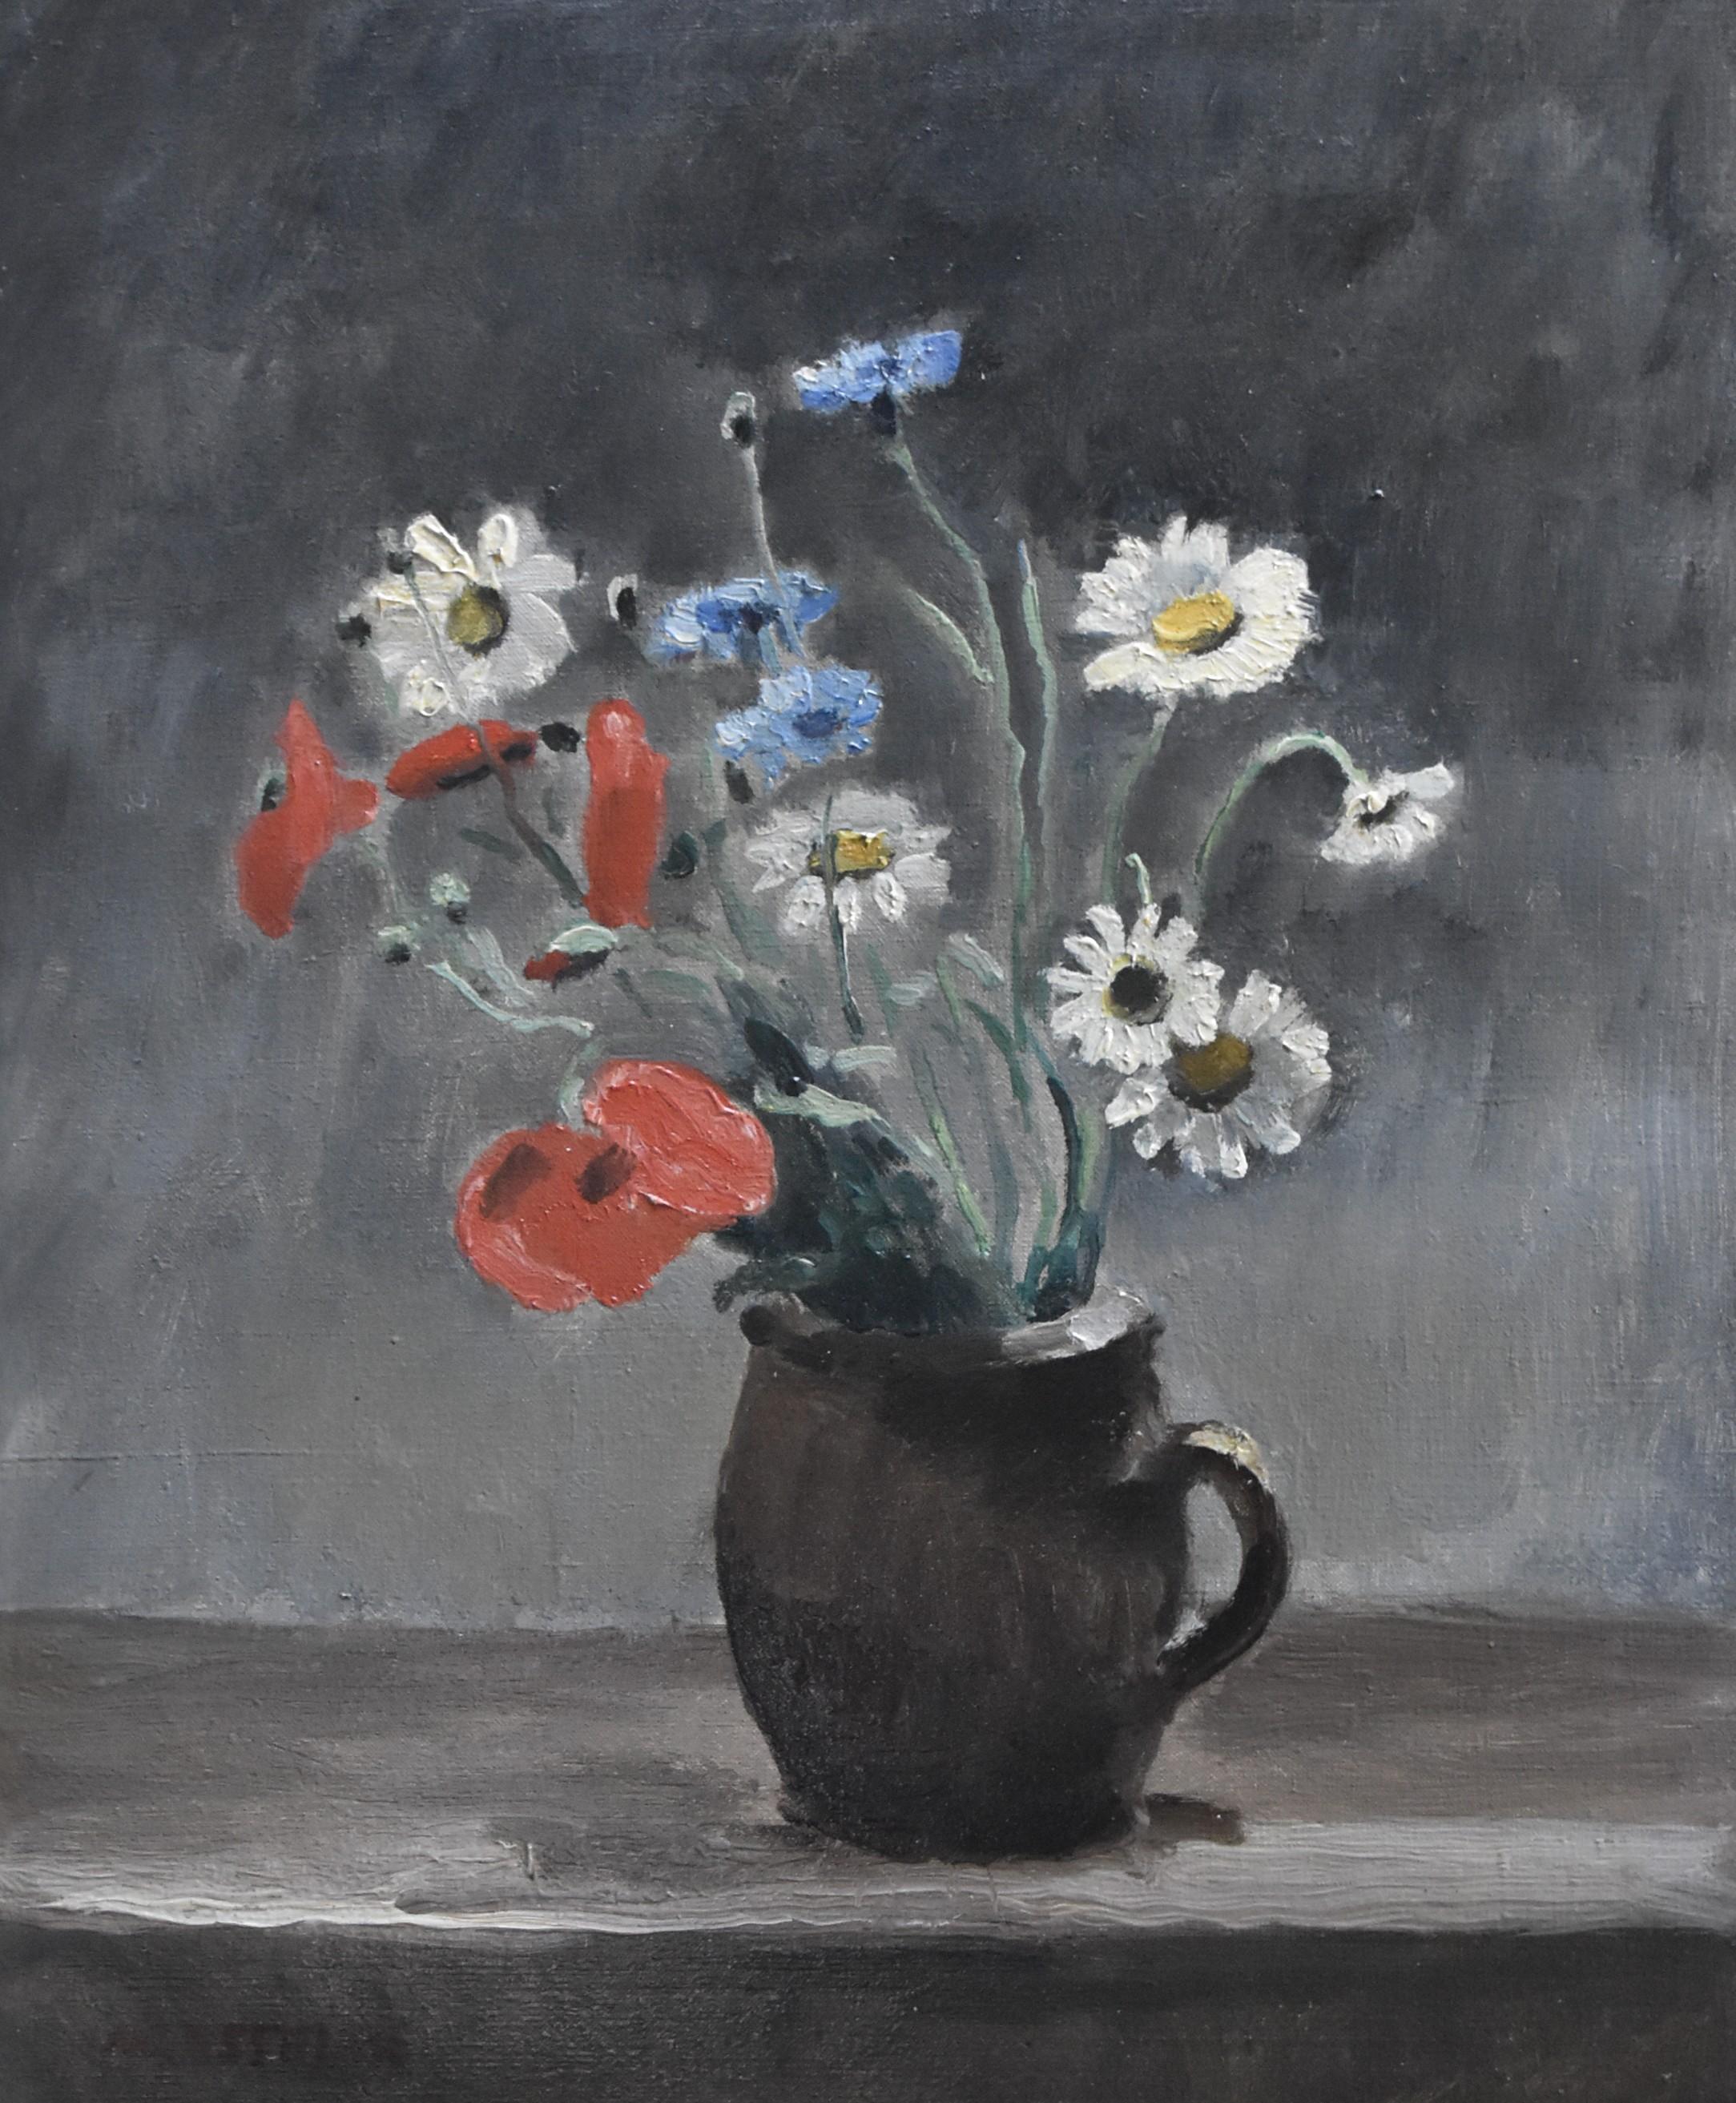 Maurice Asselin (1882-1947) 
A Field flower bouquet
Signed lower left,  
Oil on canvas
46 x 38 cm
In good condition : canvas slightly undulating, recently cleaned
In a modern frame  : 52 x 44 cm


Maurice Asselin is a painter and engraver, member of